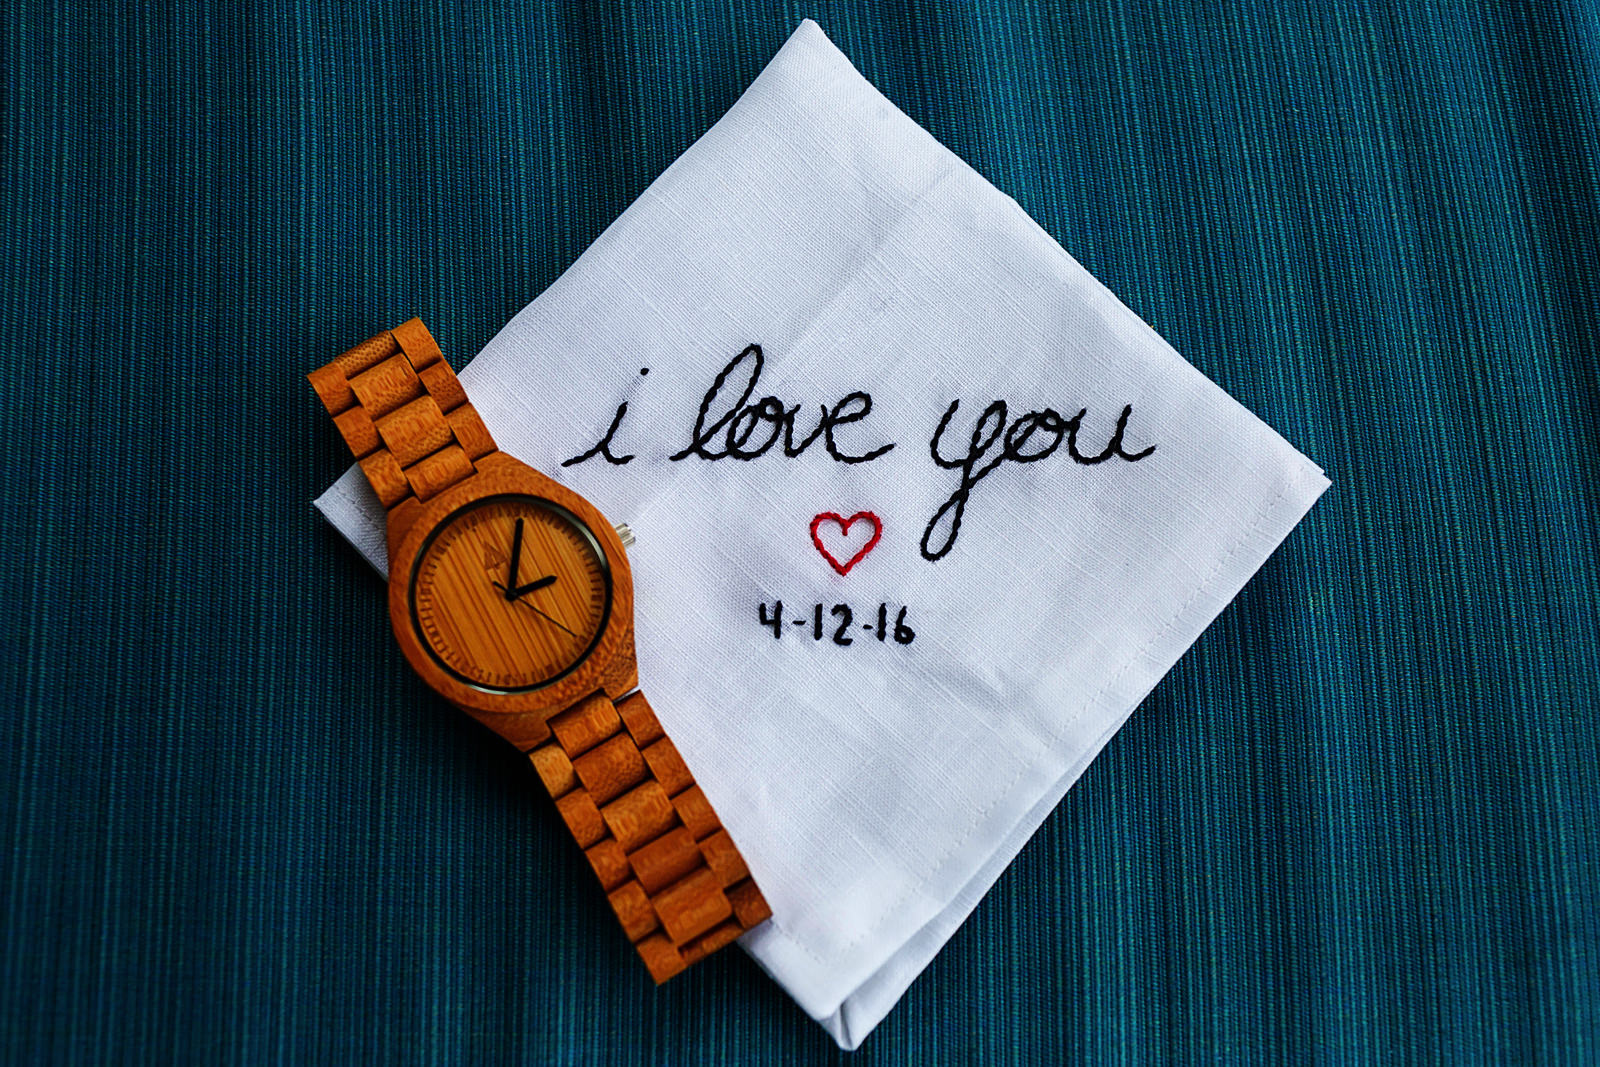 handkerchief with words I LOVE YOU and wedding date embroiled next to wood wrist watch